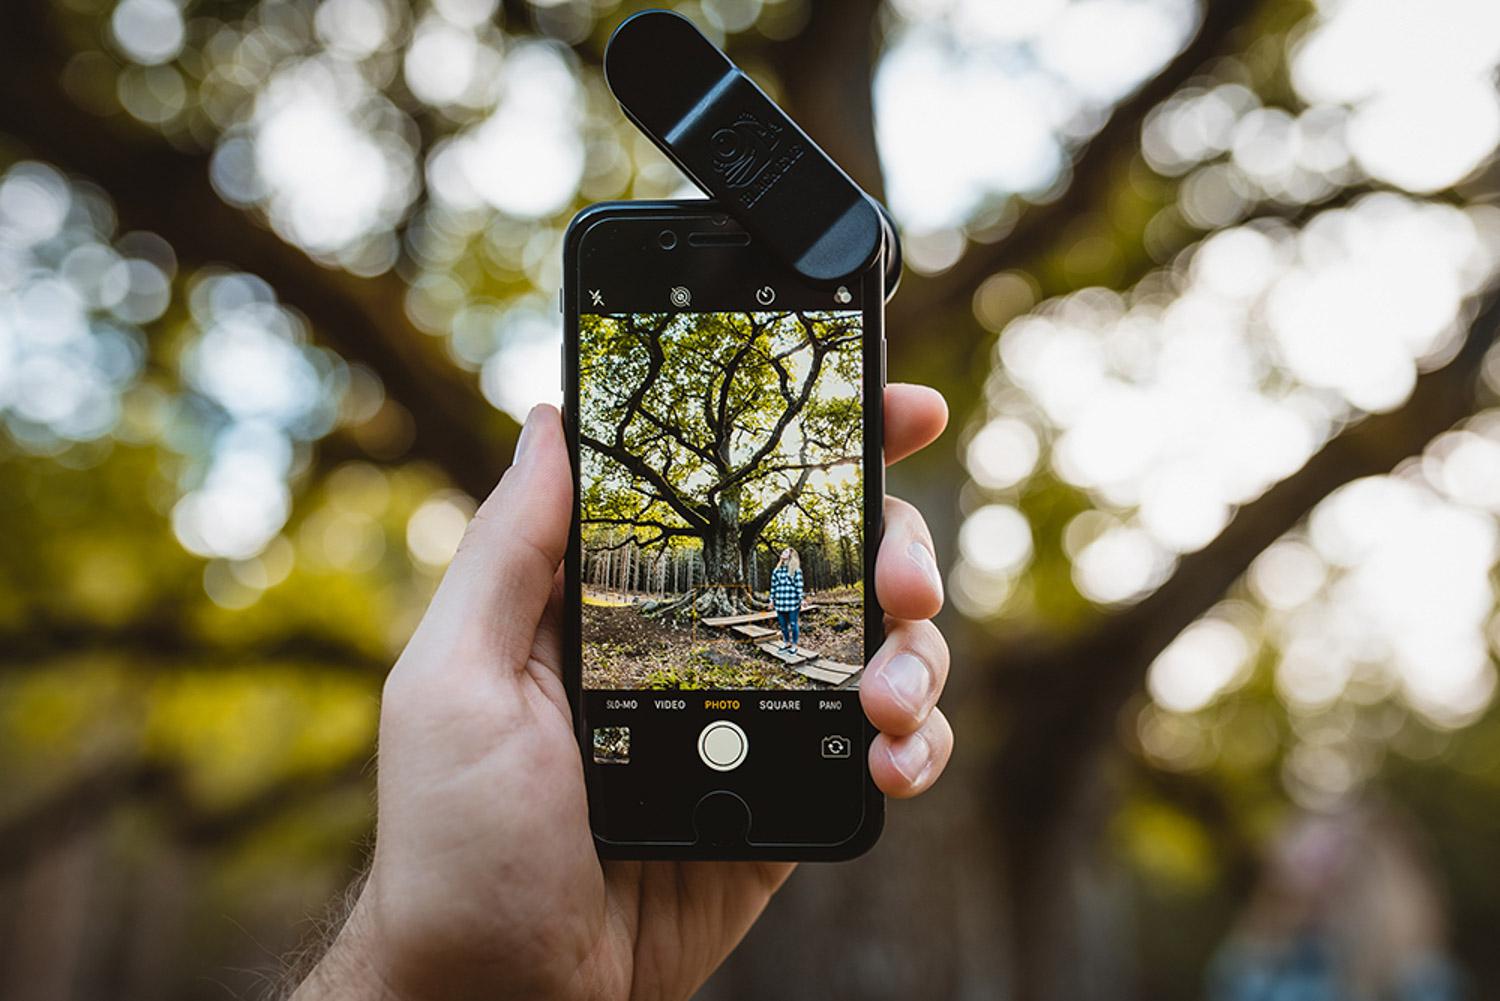 Setting up the lens on your phone only takes seconds and your good to go!